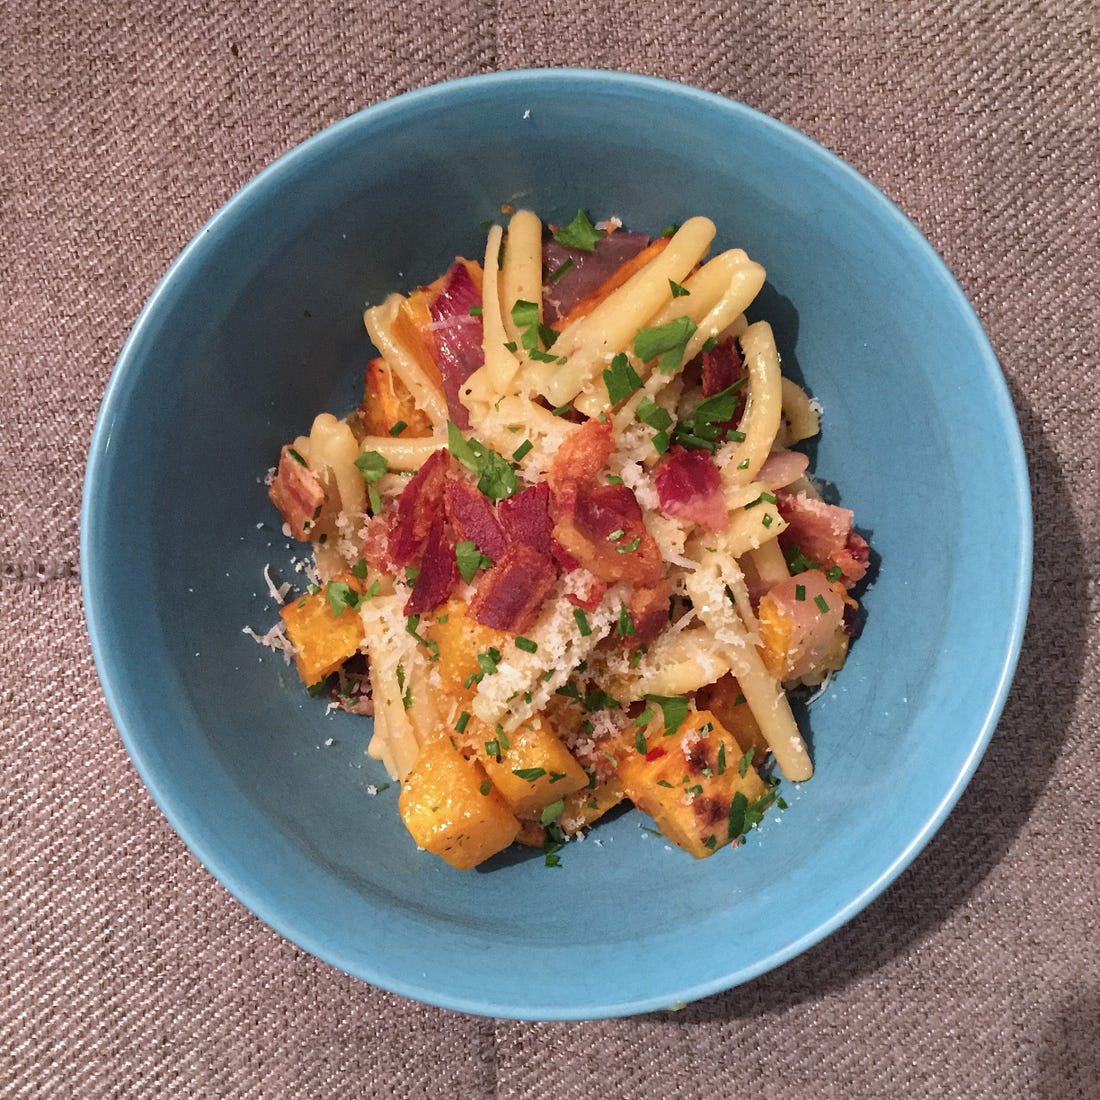 a blue bowl full of casarecce, browned cubes of butternut squash, and pieces of bacon. On top is a dusting of chives and parsley, and parmesan.